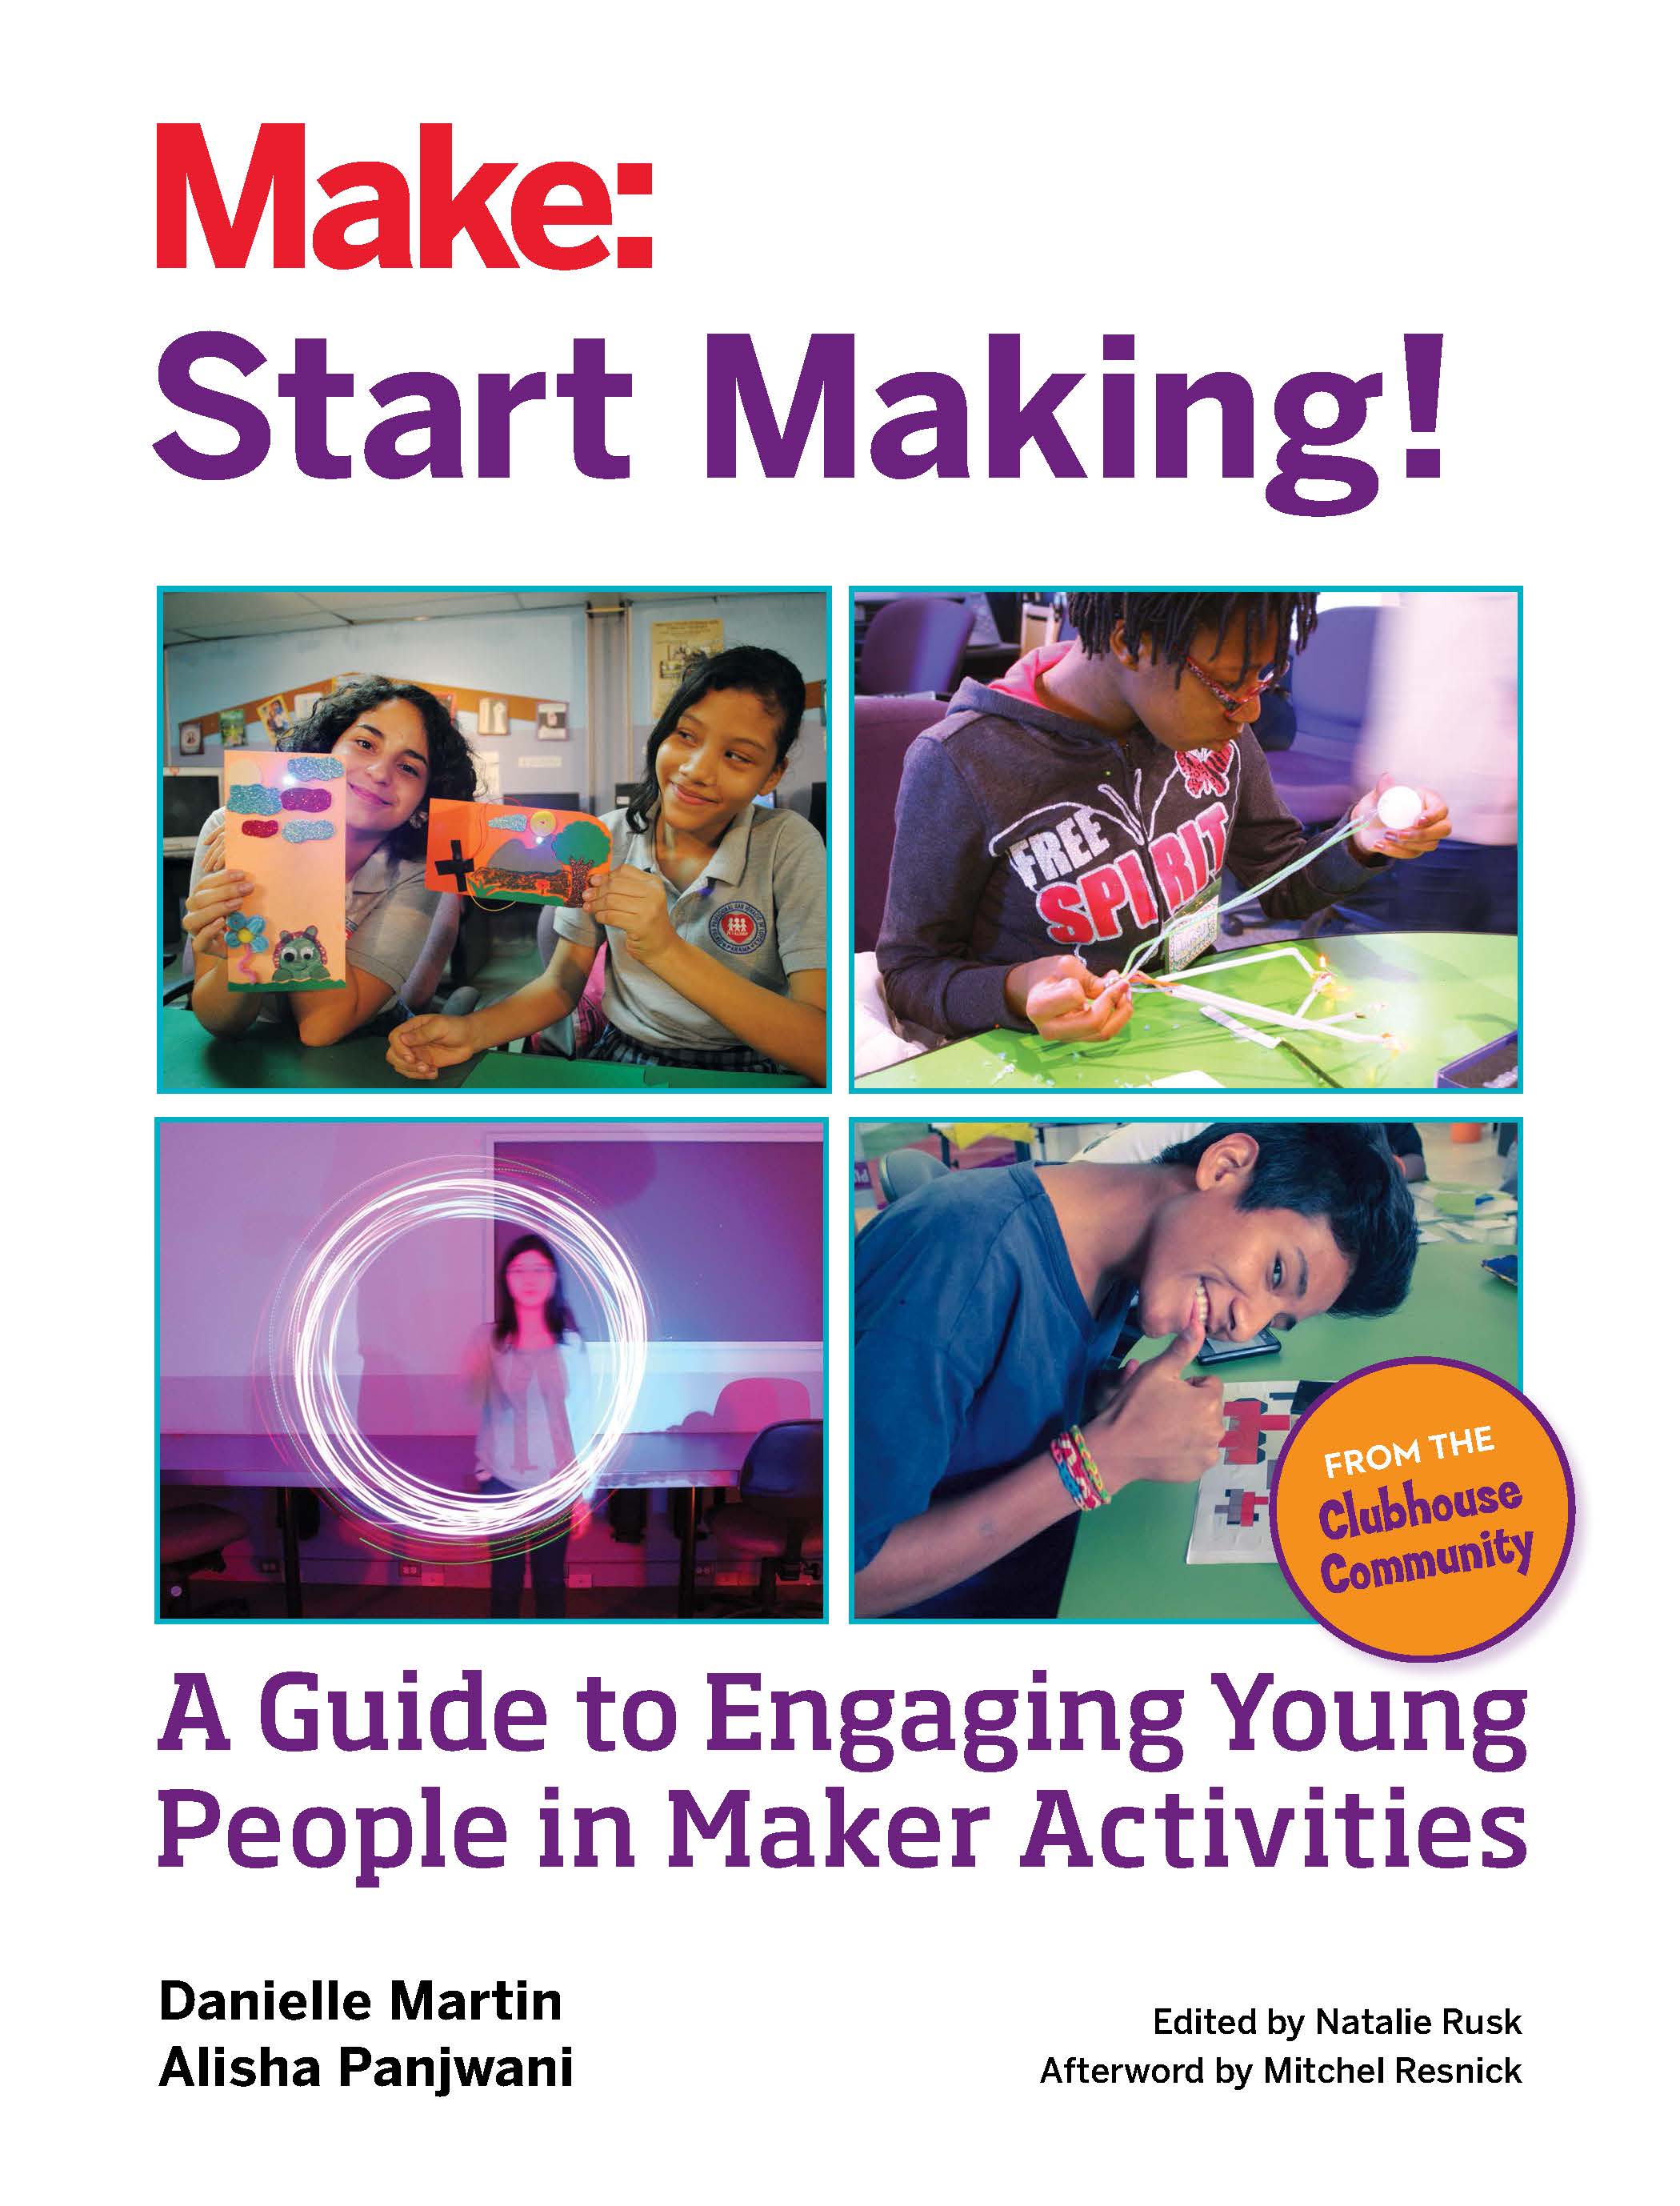 Start Making! Engaging Young People in Maker Activities